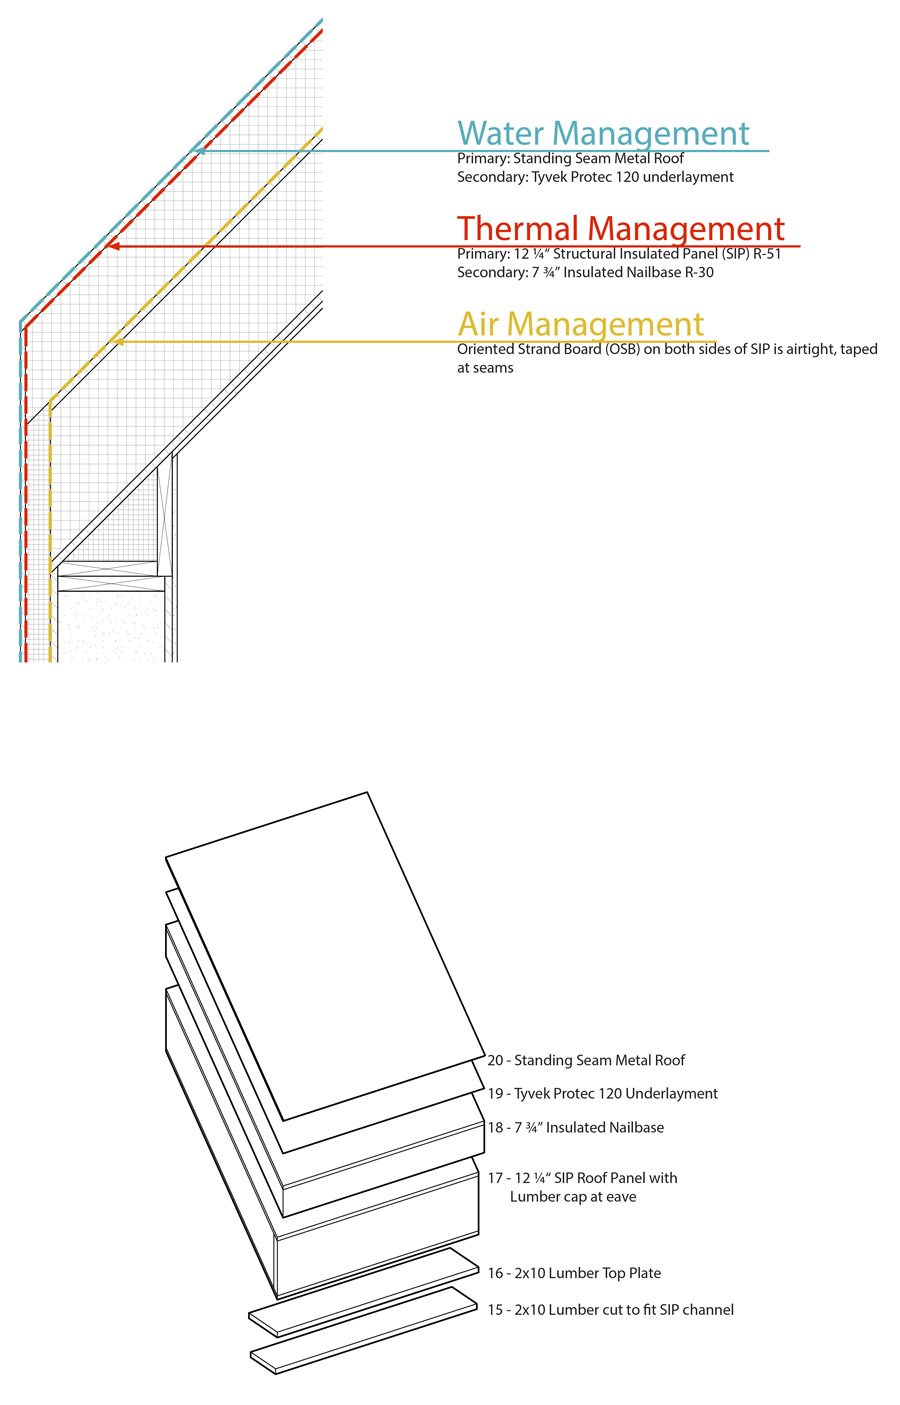 Roof assembly section and diagram showing material layers and indicating the water, thermal, and air management barriers. 